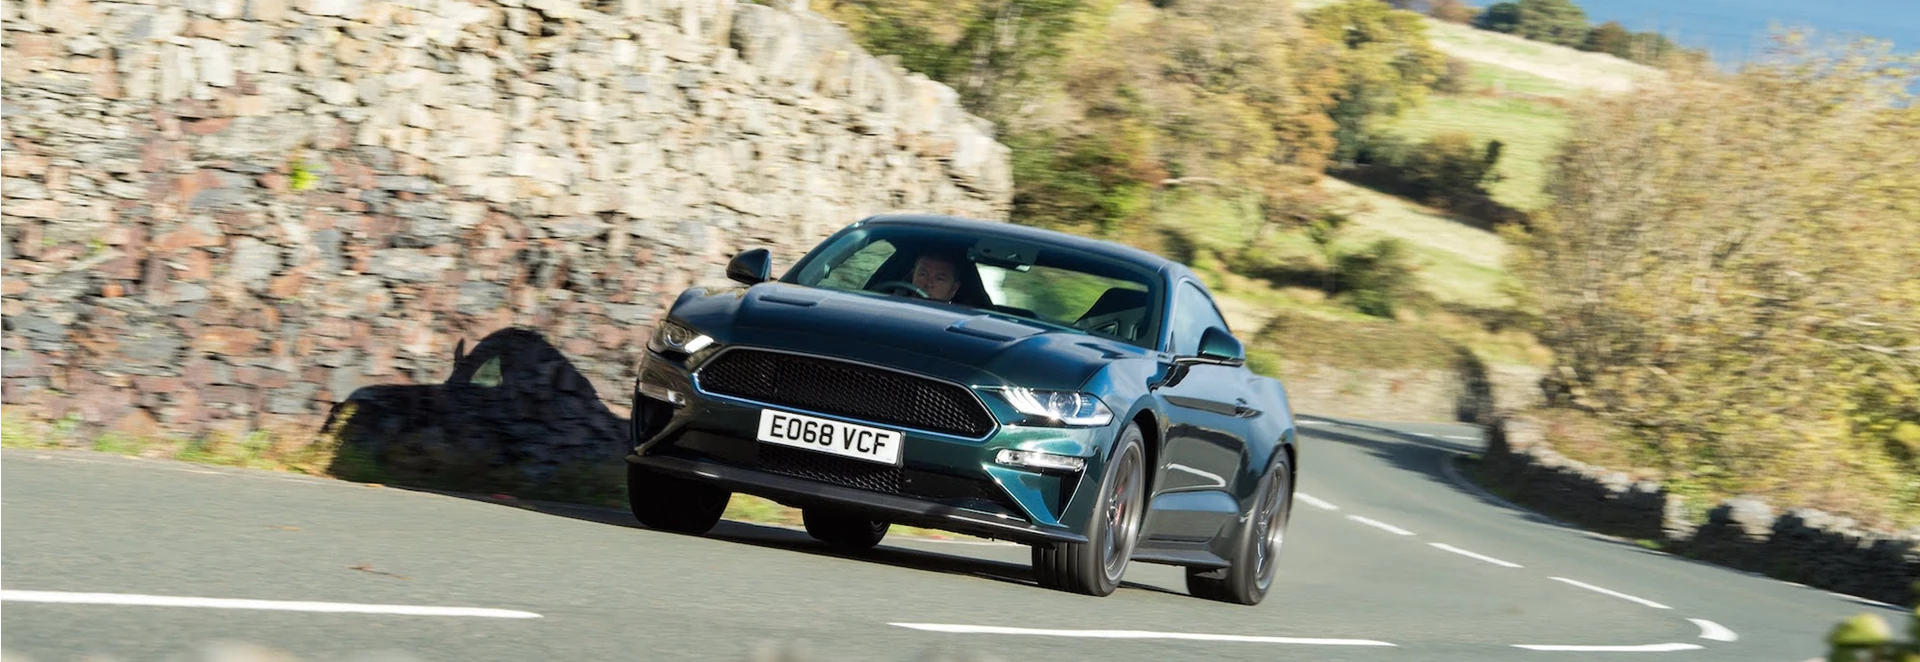 Ford Mustang Bullitt takes on the famous Isle of man TT course 